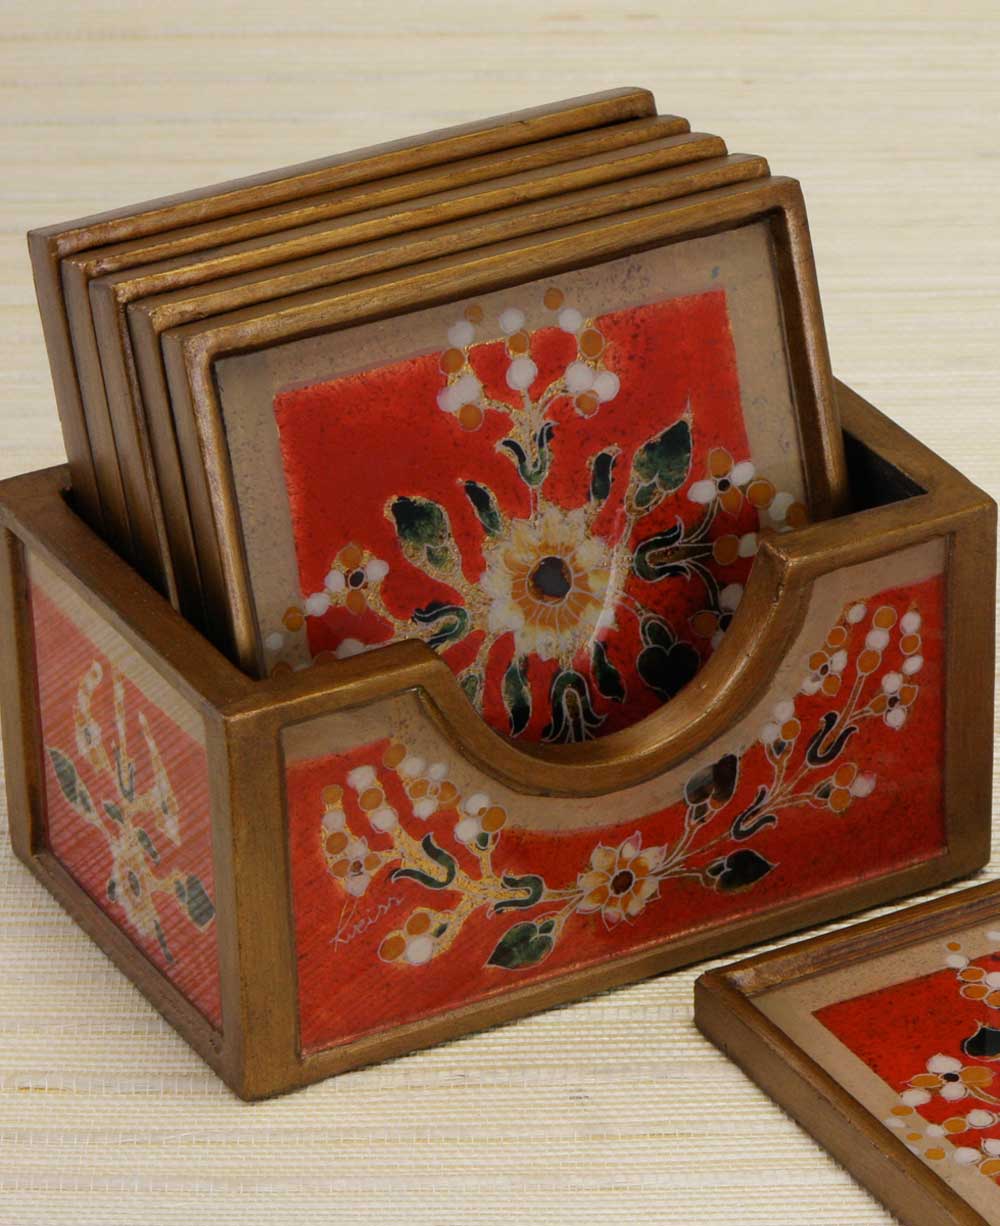 Peruvian Reverse Glass Painted Coaster Set of 6 with Stand